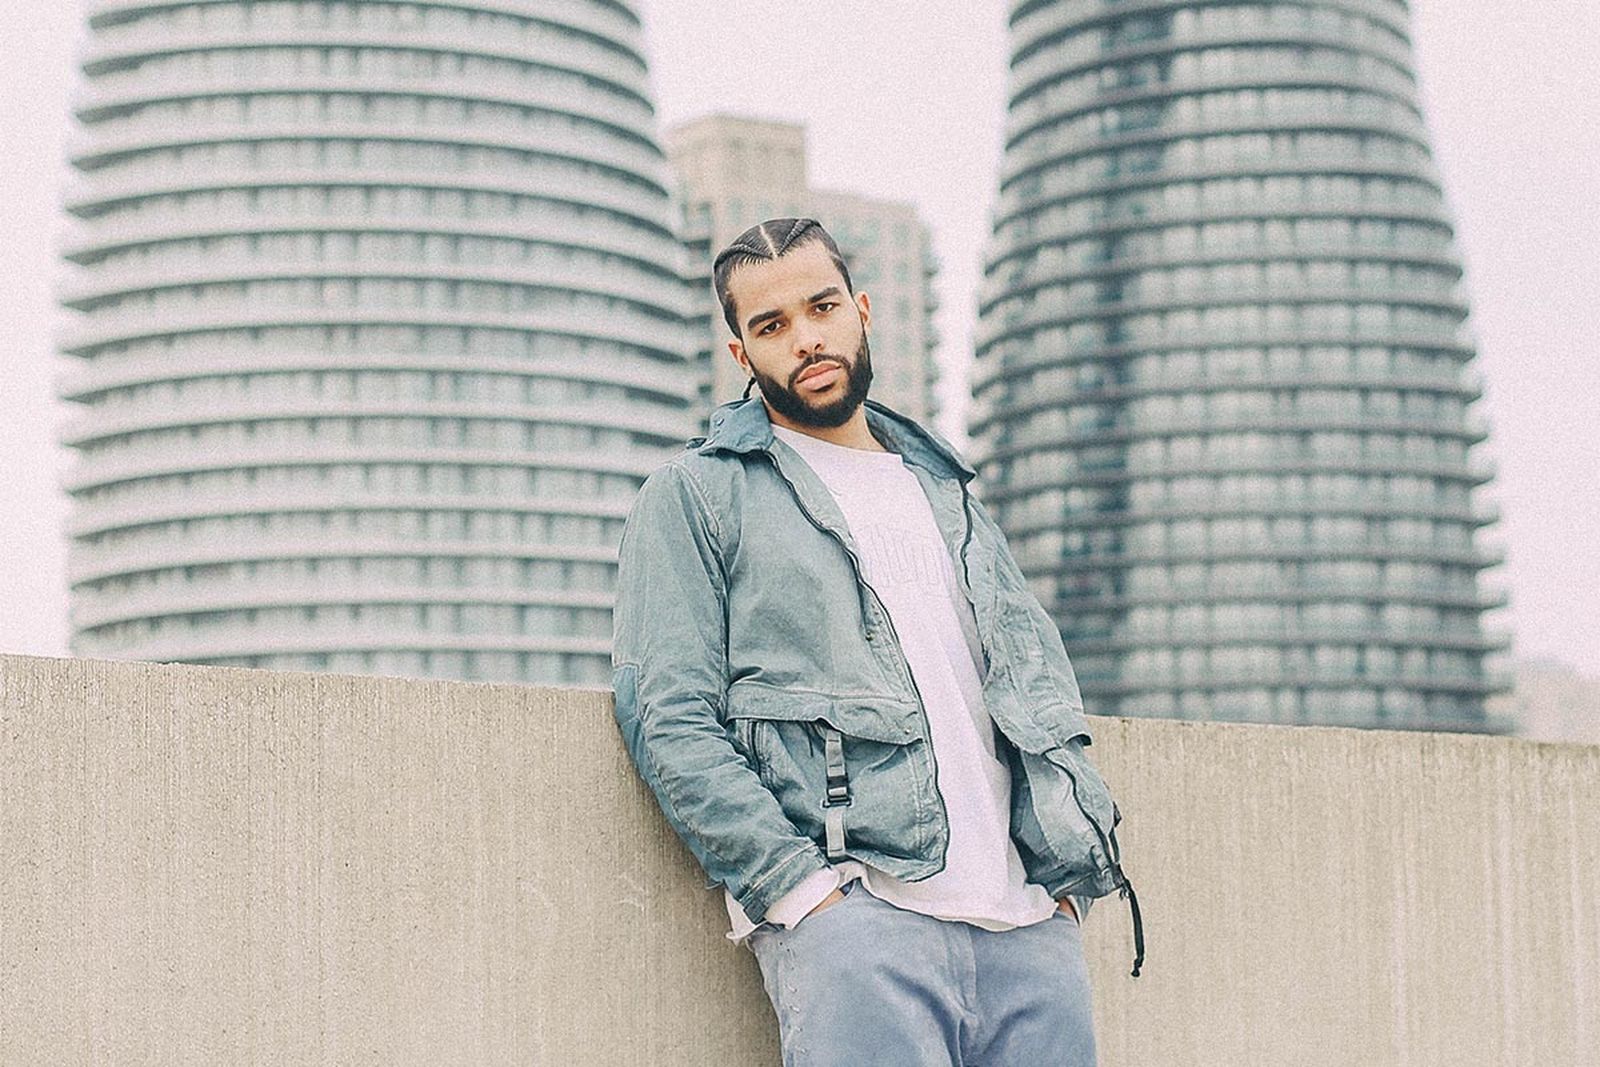 Actor and musician AJ Saudin wears the new M.T.t.N. Goggle Jacket from C.P. Company's SS20 collection.